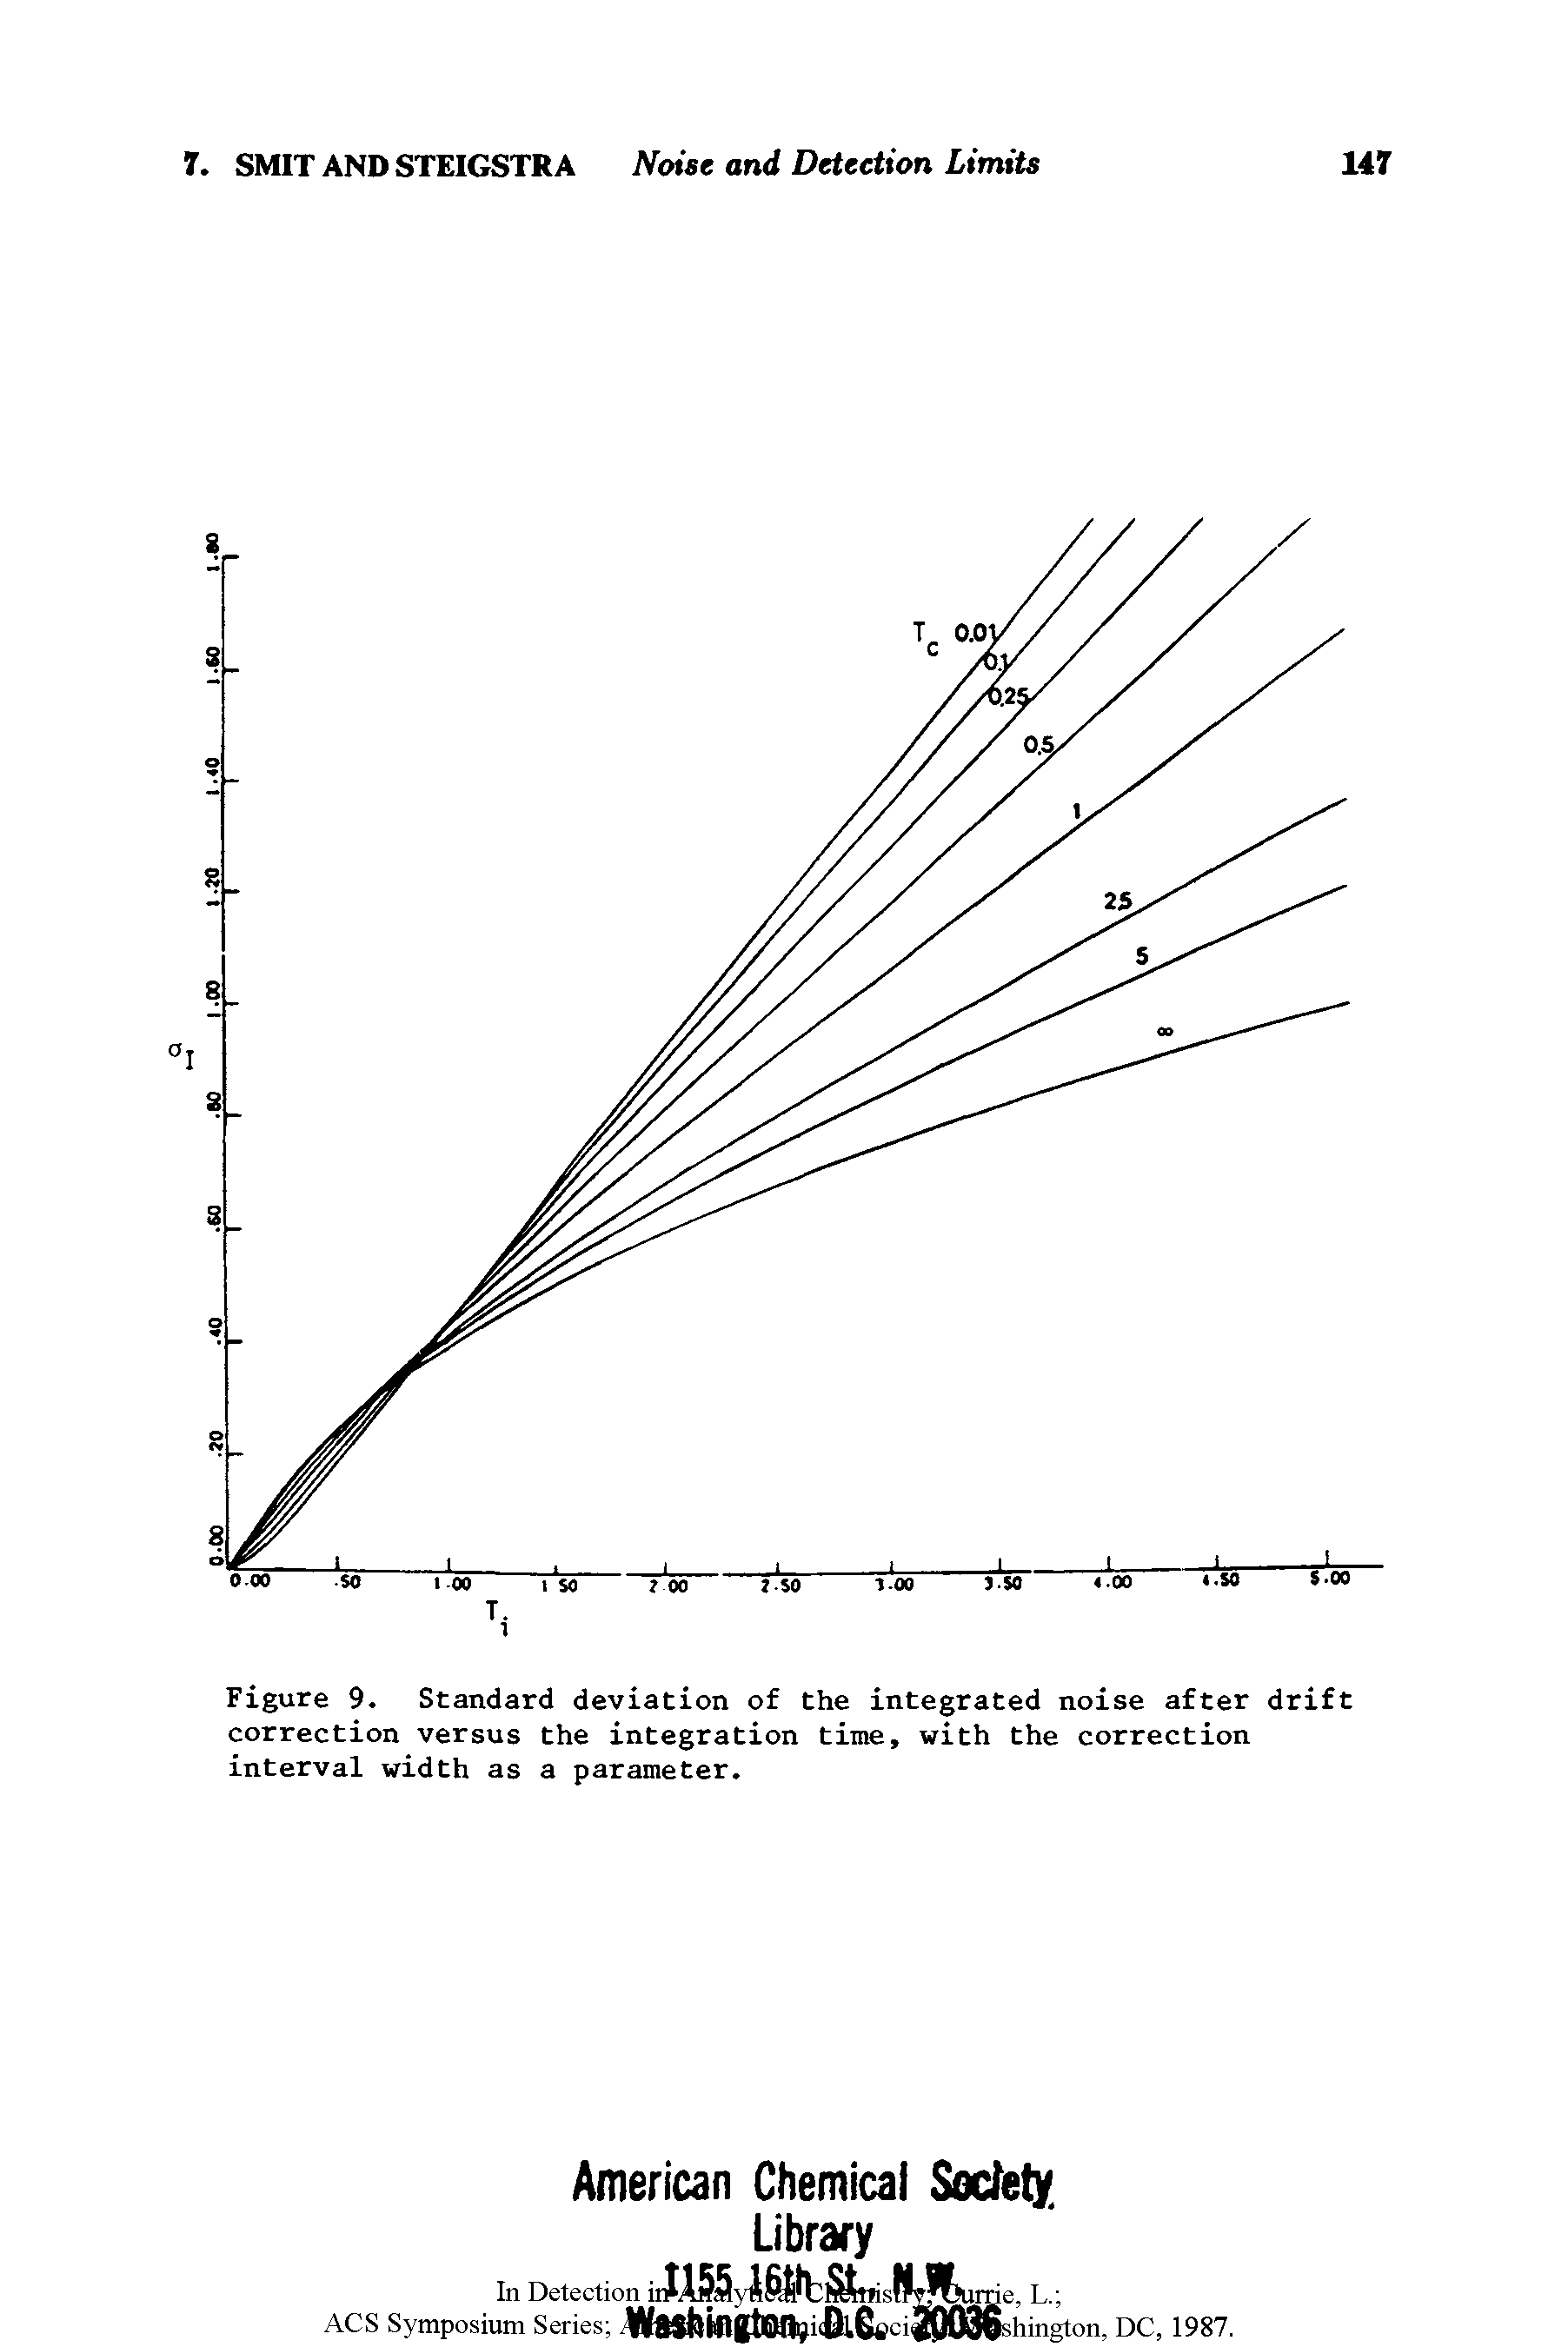 Figure 9. Standard deviation of the integrated noise after drift correction versus the integration time, with the correction interval width as a parameter.